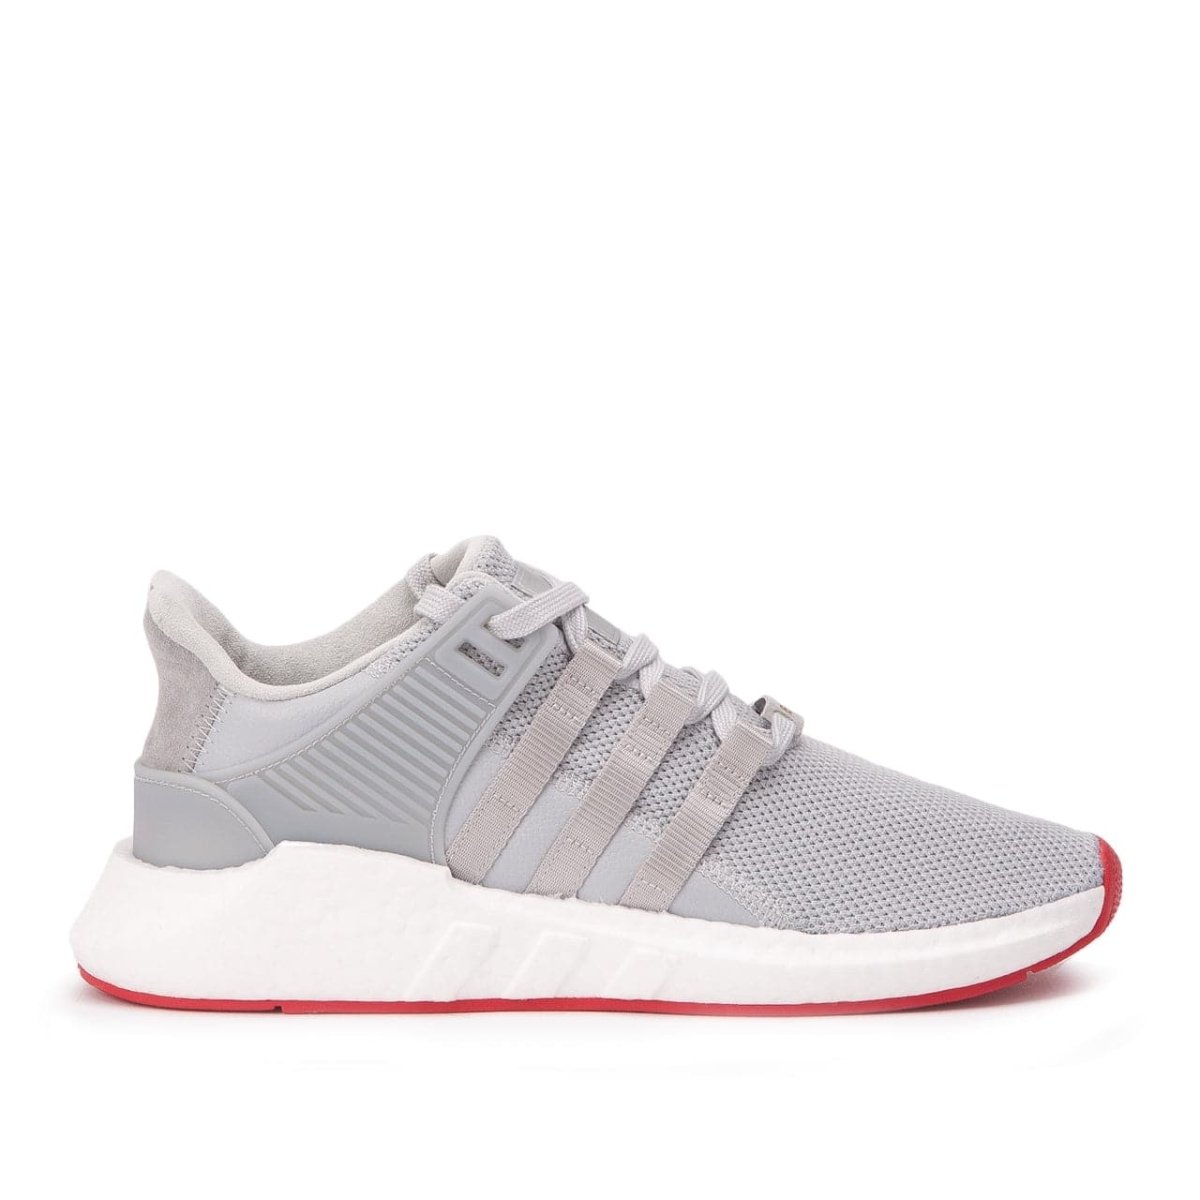 adidas EQT Support 93/17 Boost 'Red Carpet Pack' (Silber / Weiß / Rot)  - Allike Store